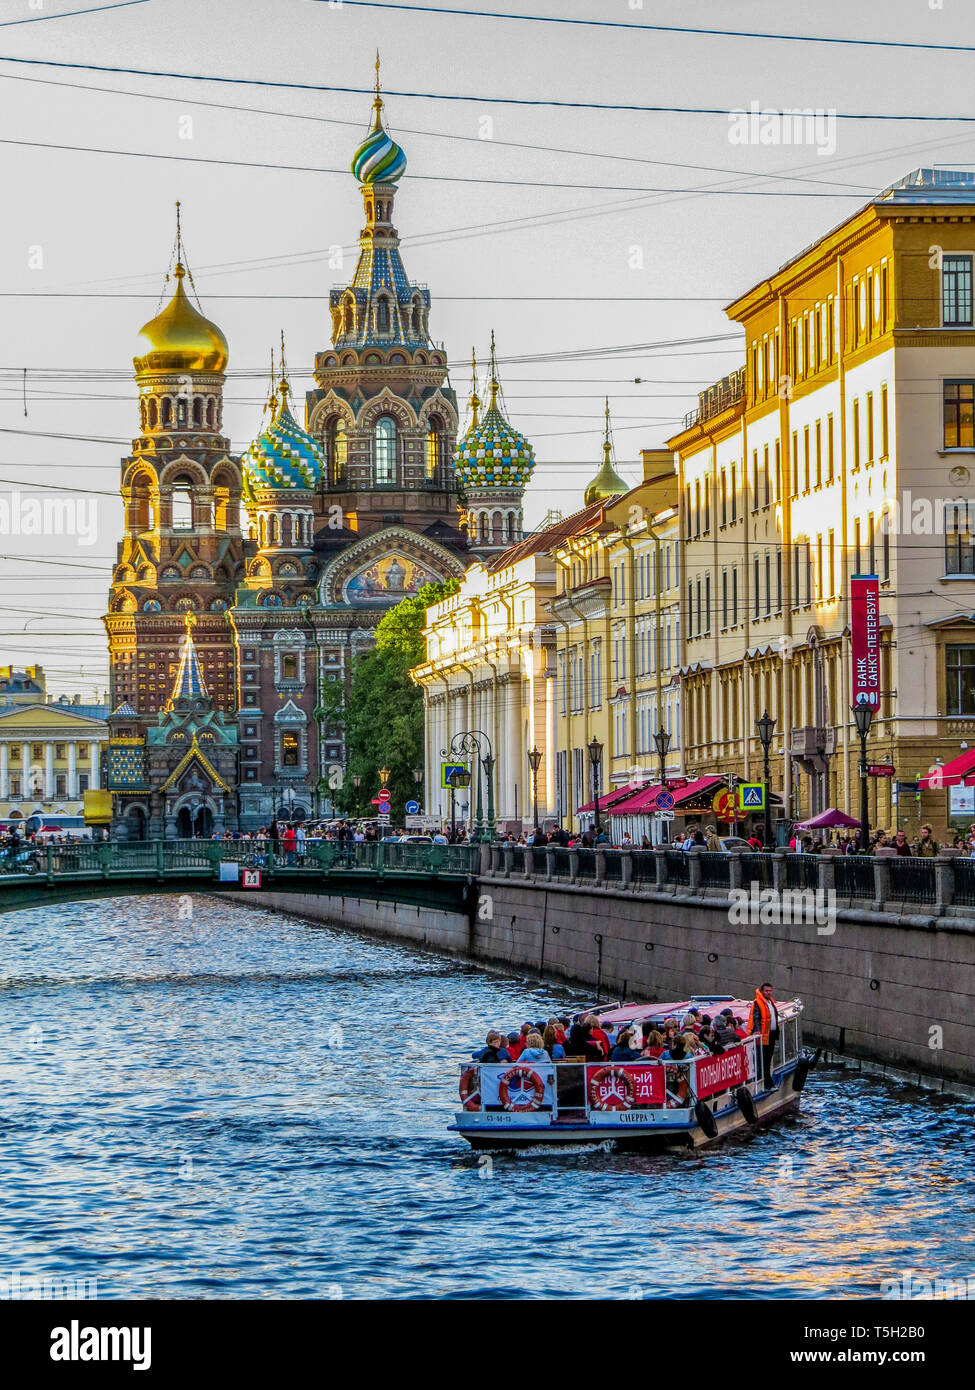 Boat with tourists on excursion on the Griboyedov Canal with the landmark Church of the Savior on Spilled Blood. St. Petersburg, Russia Stock Photo